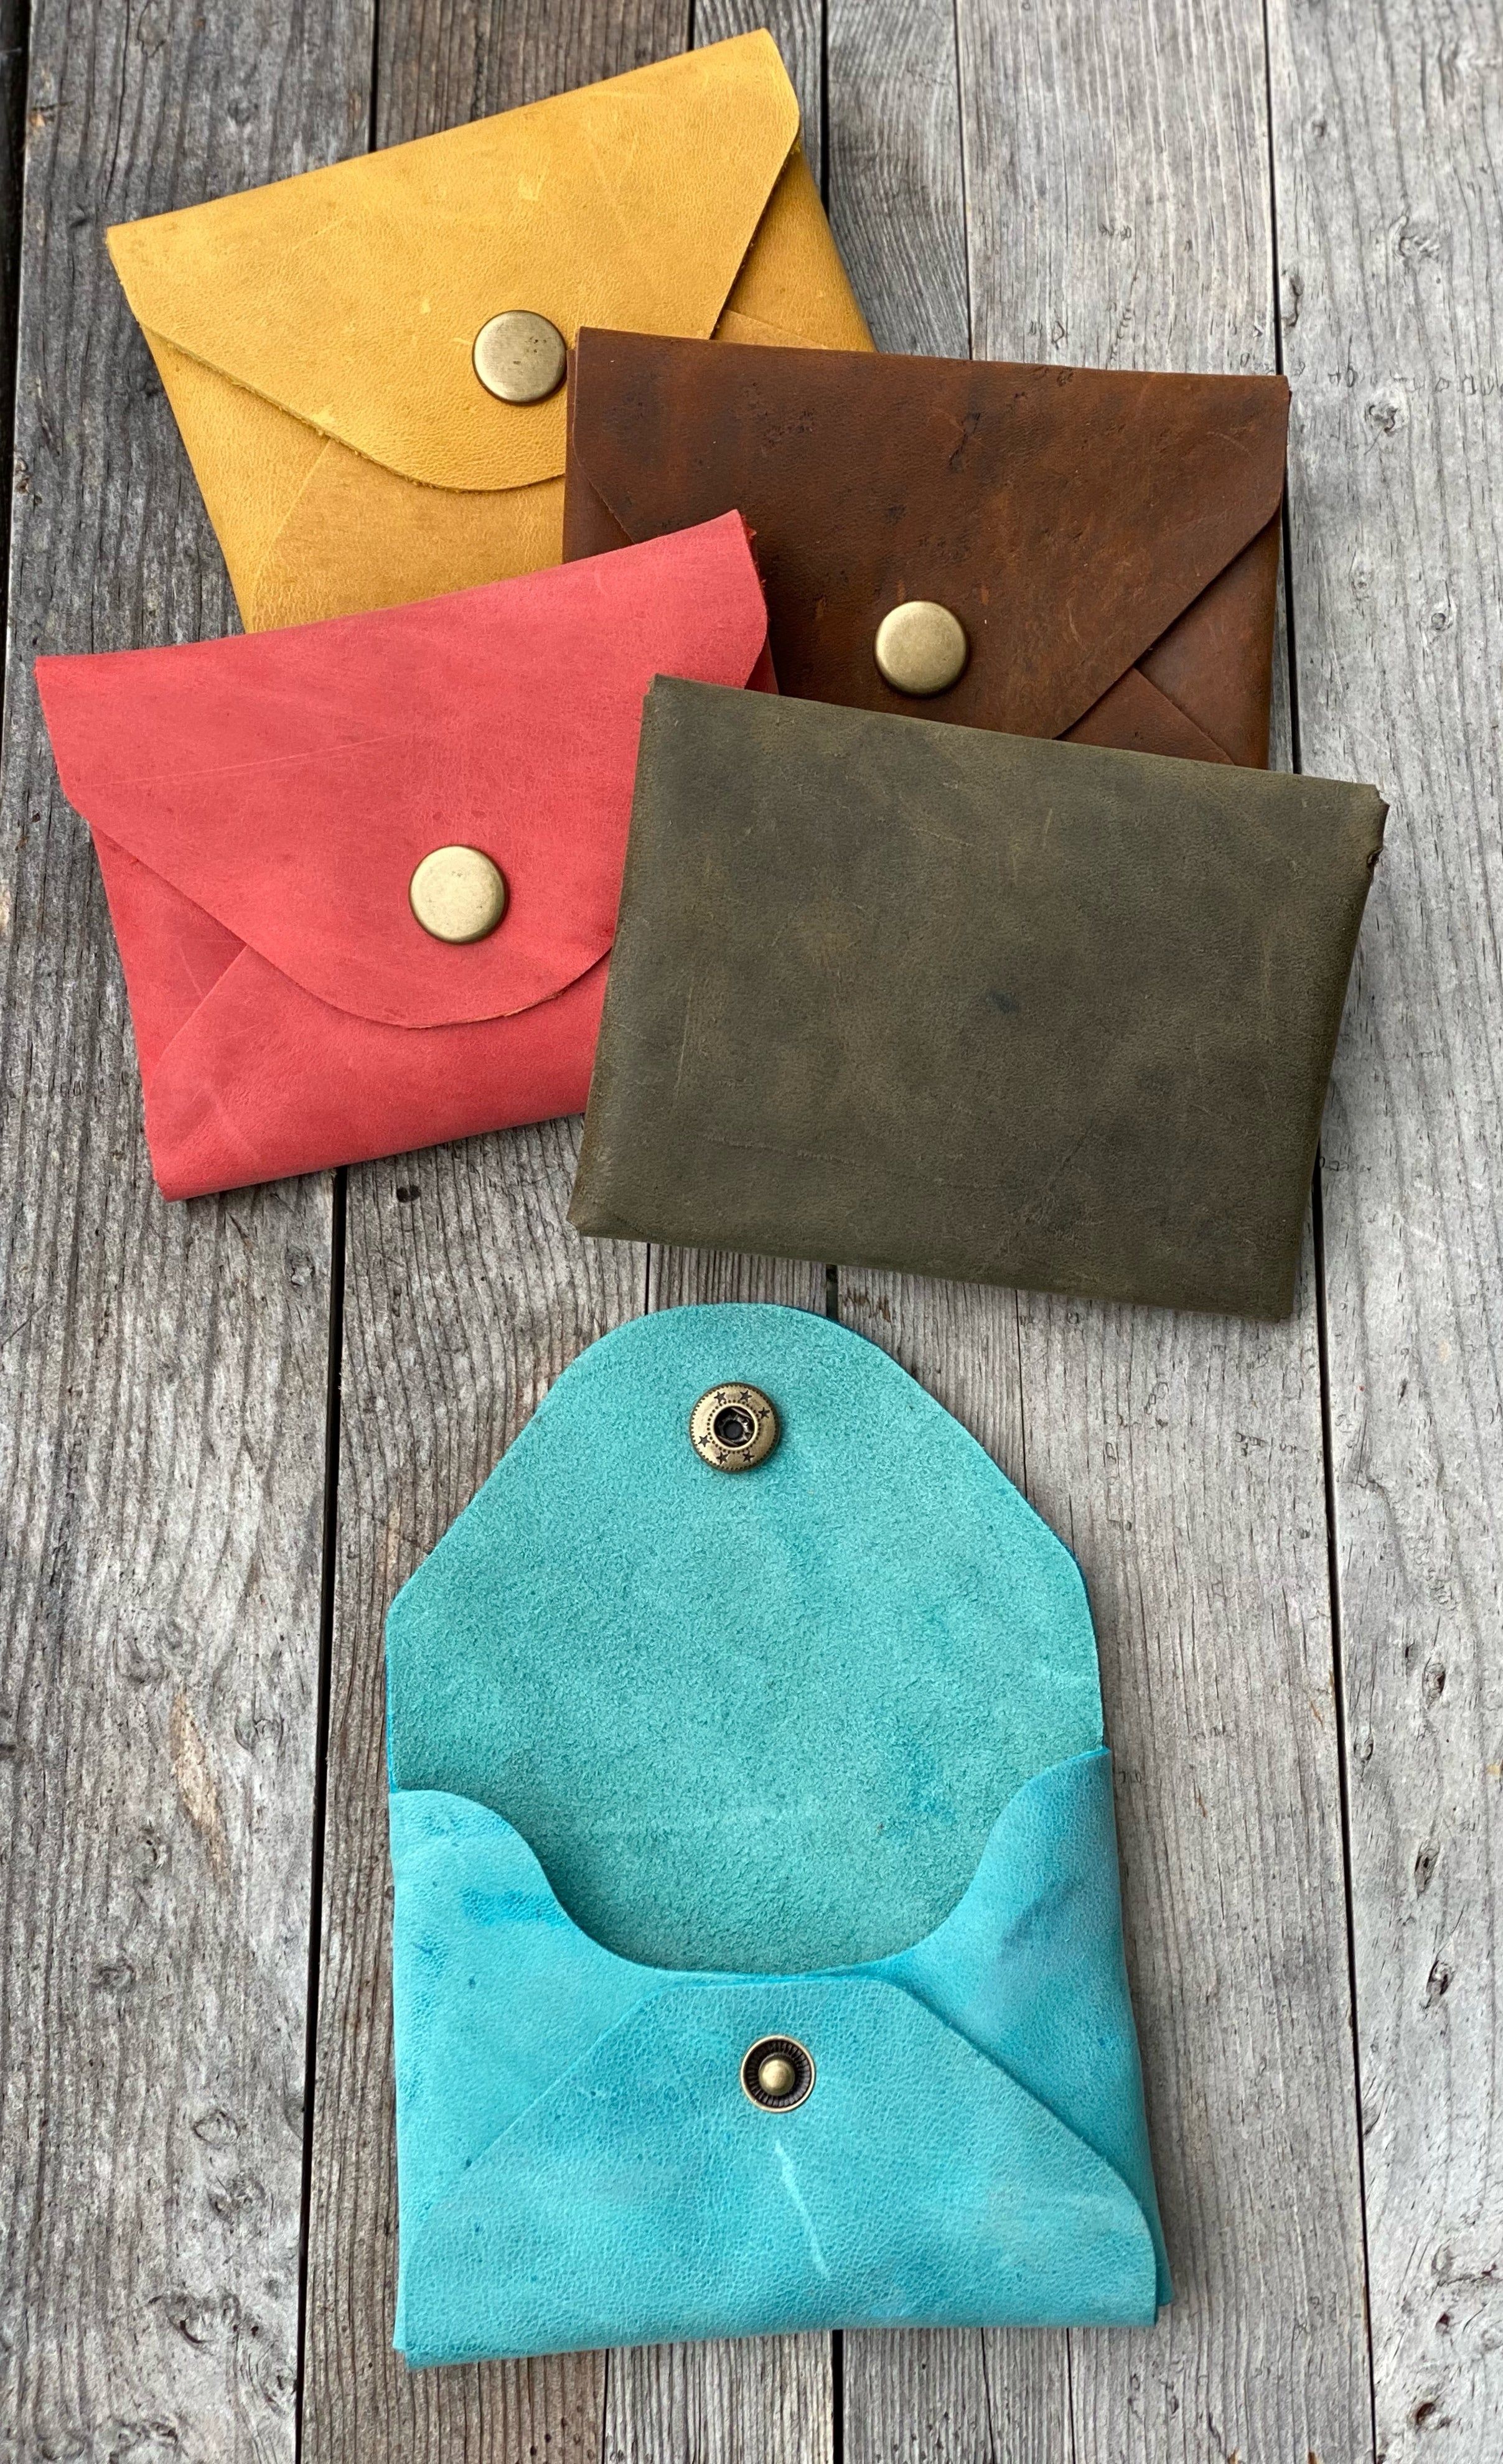 Mini Leather Card Cash Wallet, Gift Card Holder, Credit Card Snap Pouch, Small Snap Coin Purse